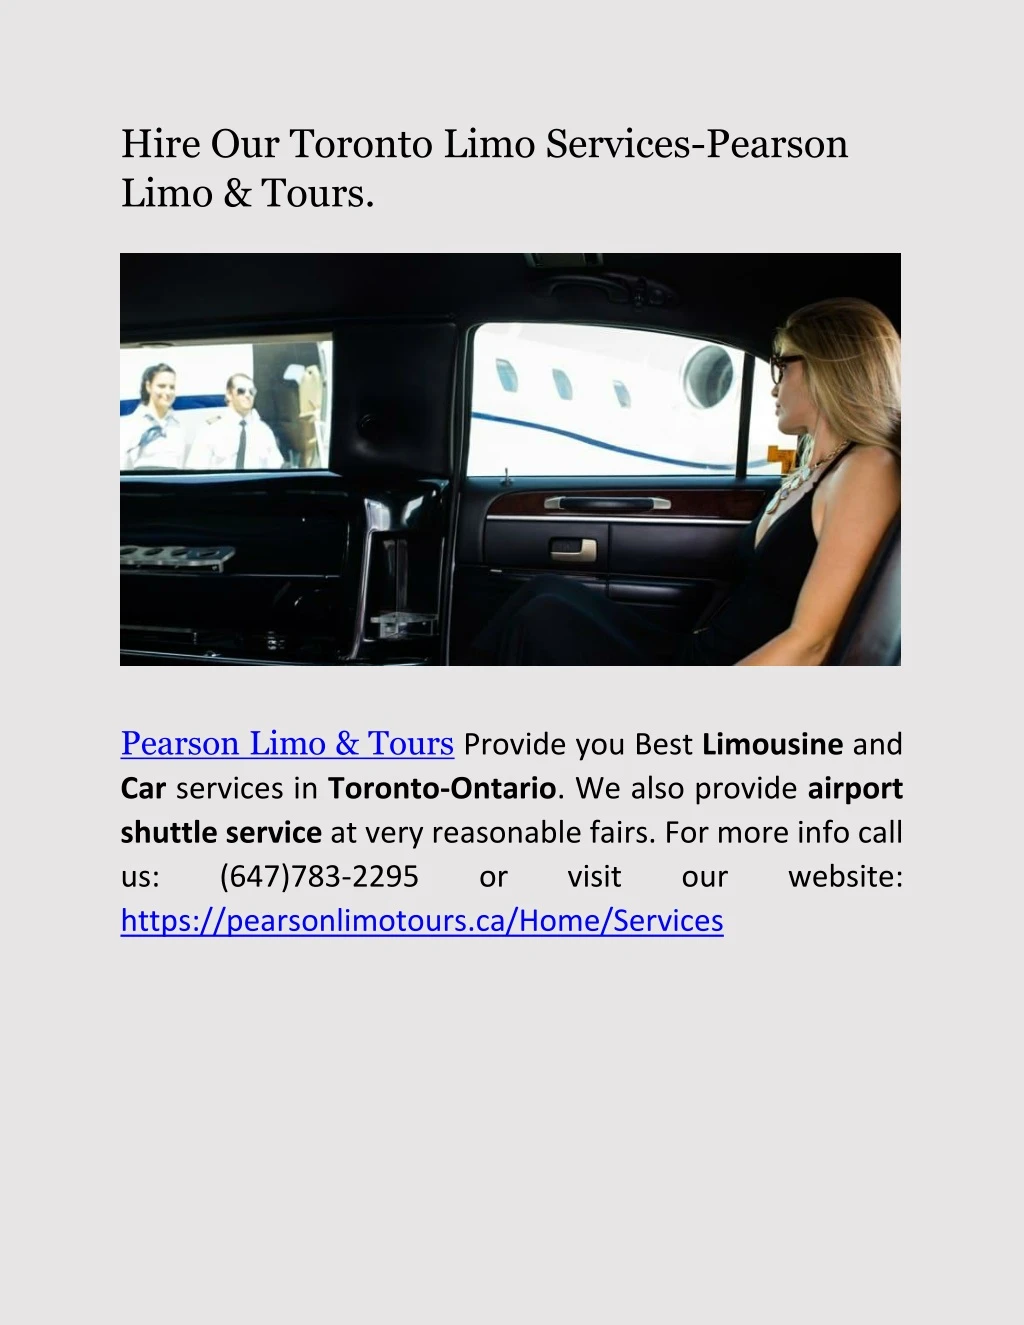 hire our toronto limo services pearson limo tours